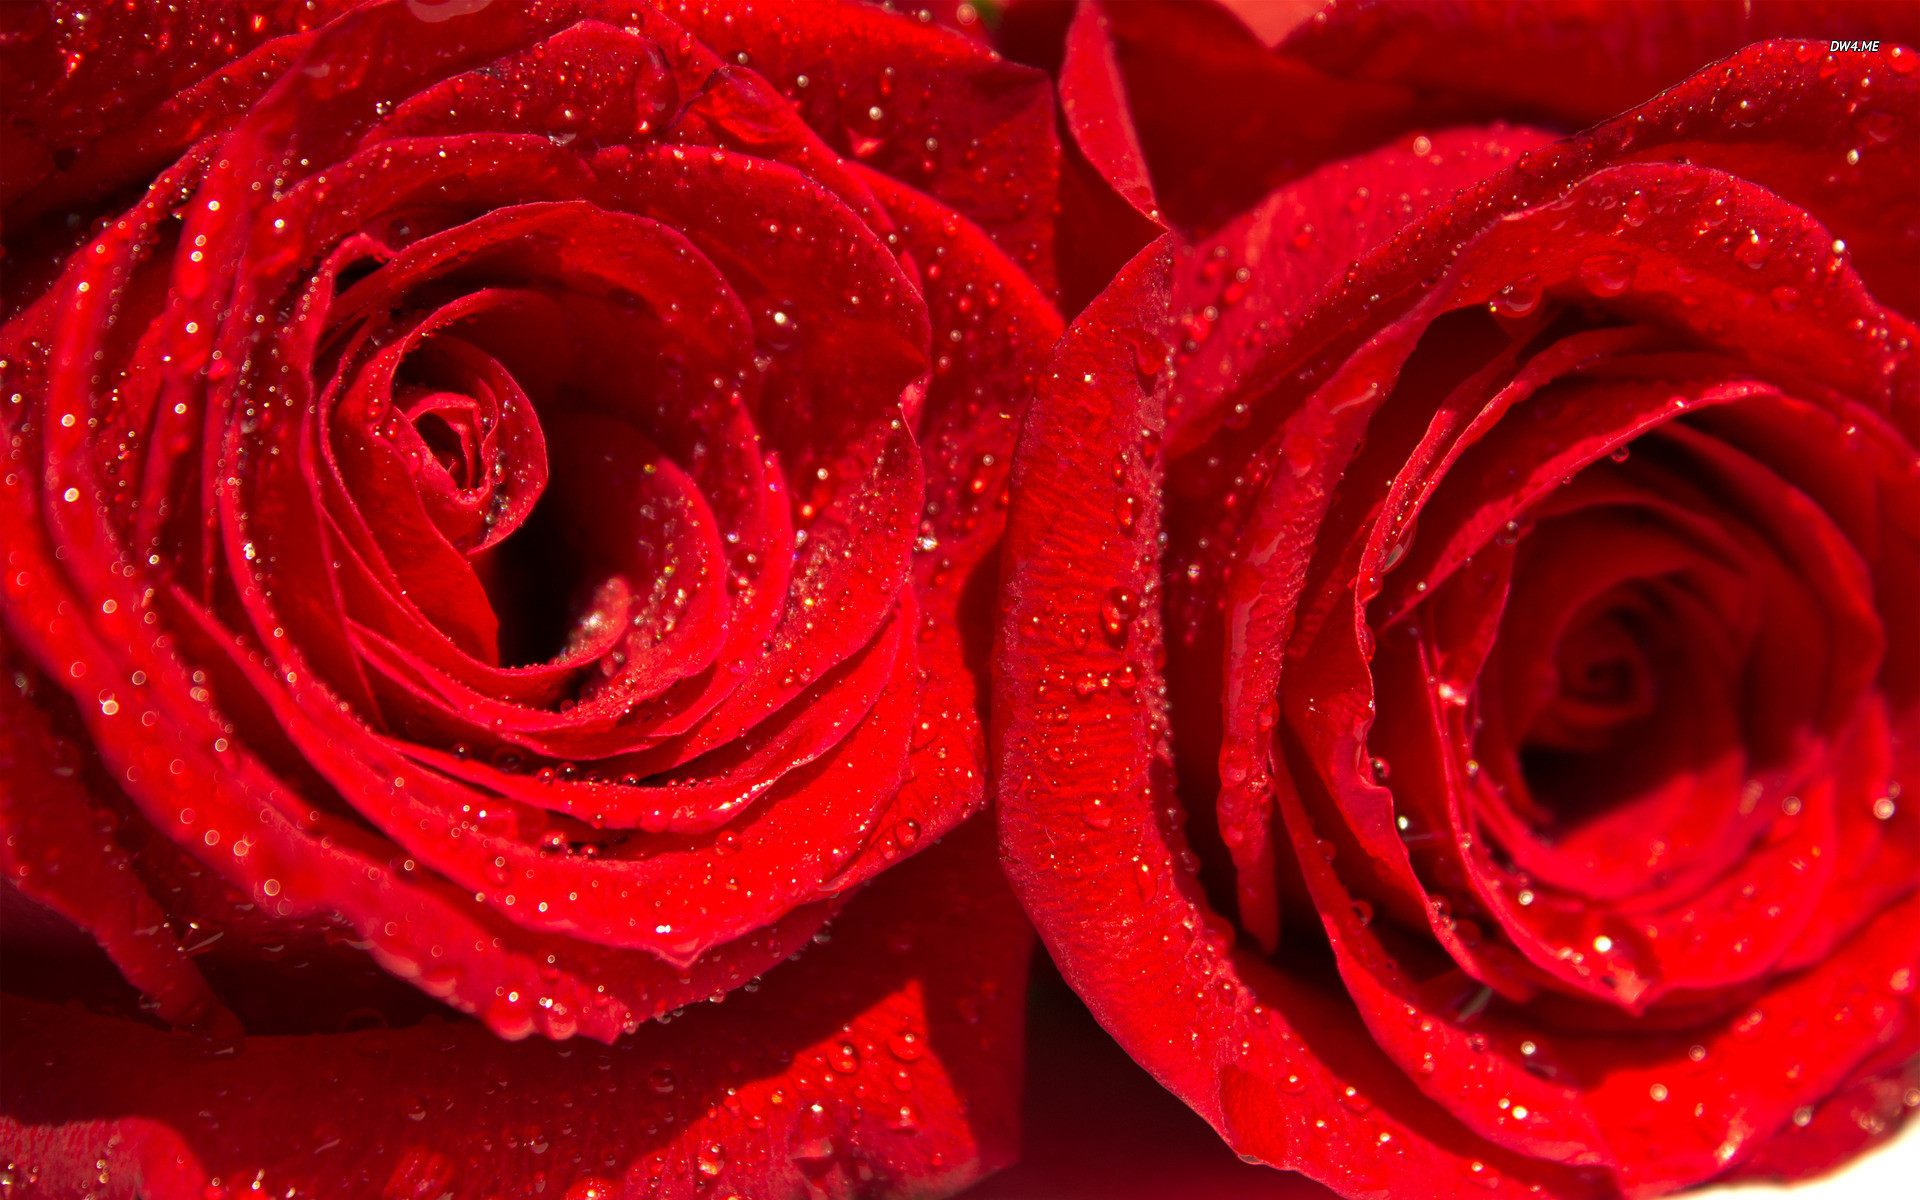 Red Rose With Water Drops Wallpaper 2016Ã1172 Rose With Water Drops  Wallpapers (39